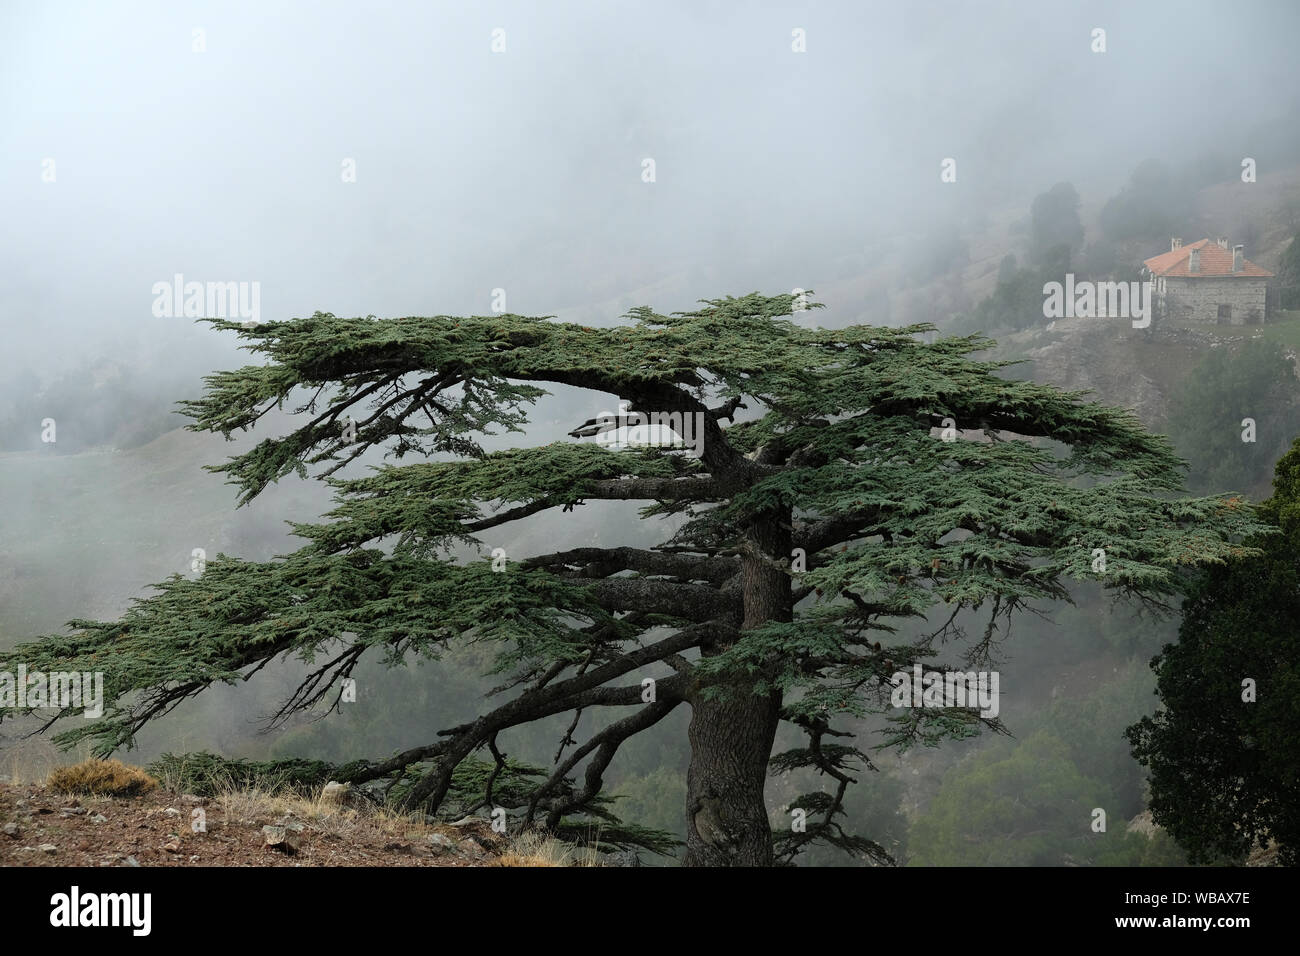 Cedrus libani, commonly known as the cedar of Lebanon or Lebanon cedar, is a species of cedar native to the mountains of the Eastern Mediterranean bas Stock Photo